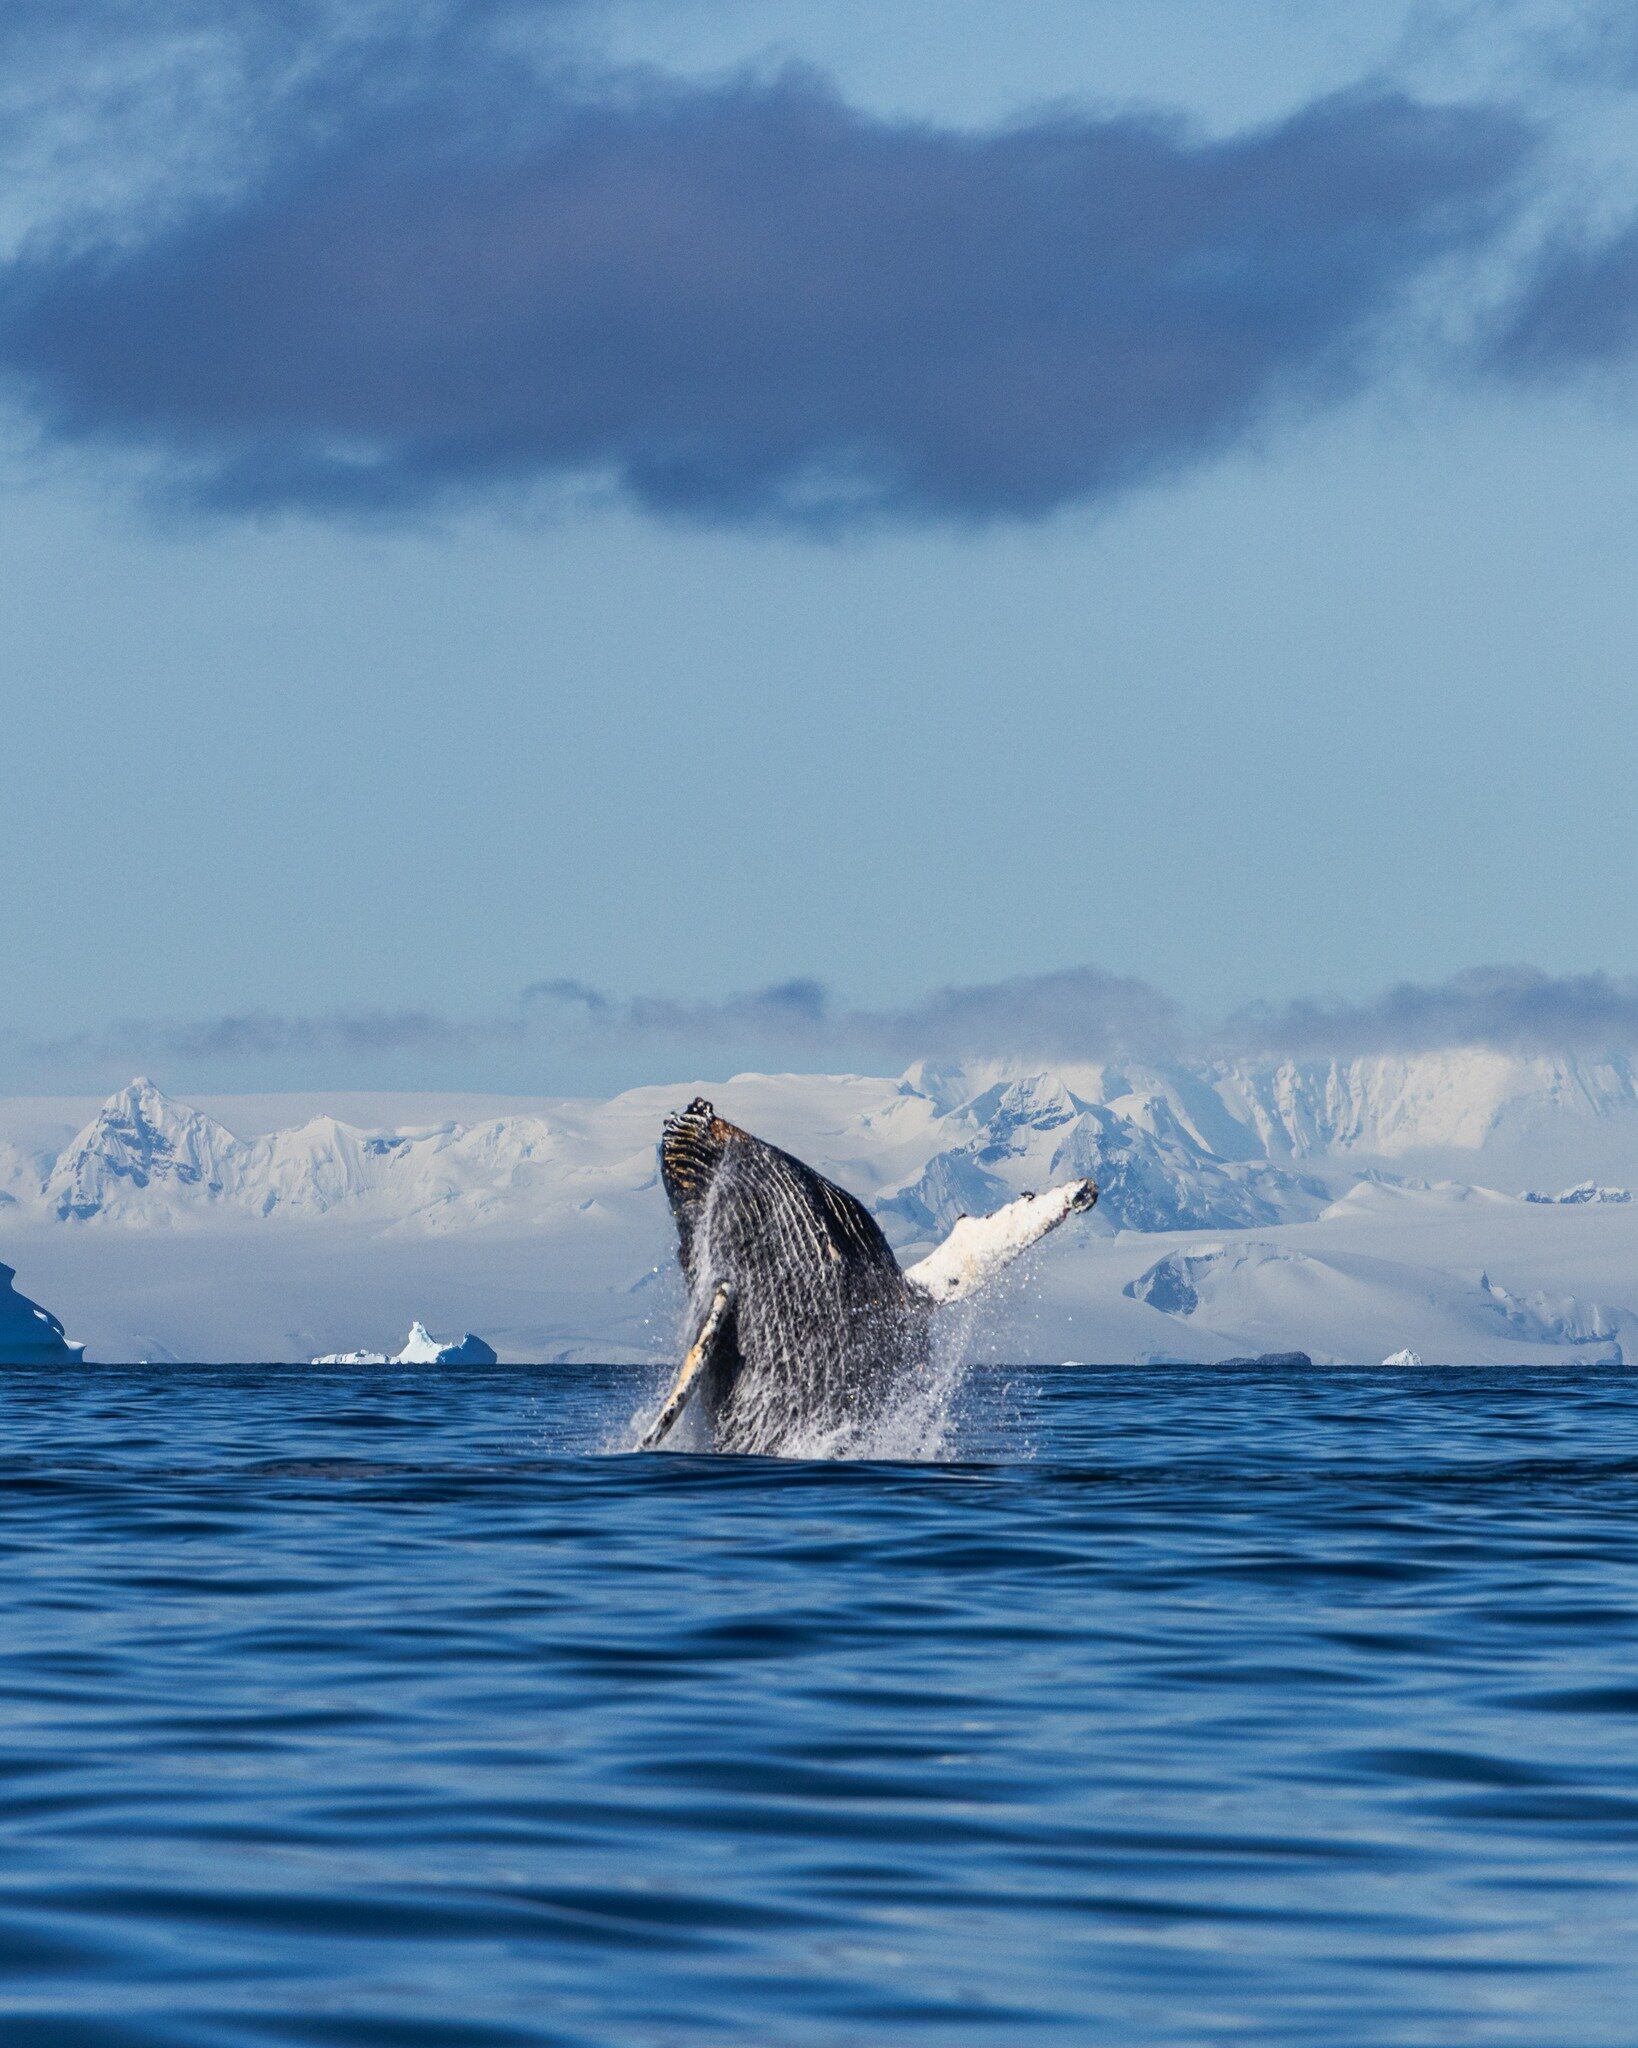 News sounded over the radio of some &quot;Big Fish&quot; swimming nearby. We arrived at Harry Island on one of the brightest days that I have seen in Antarctica and started the cruise over the surface of the endless blue water. While our bearing was 